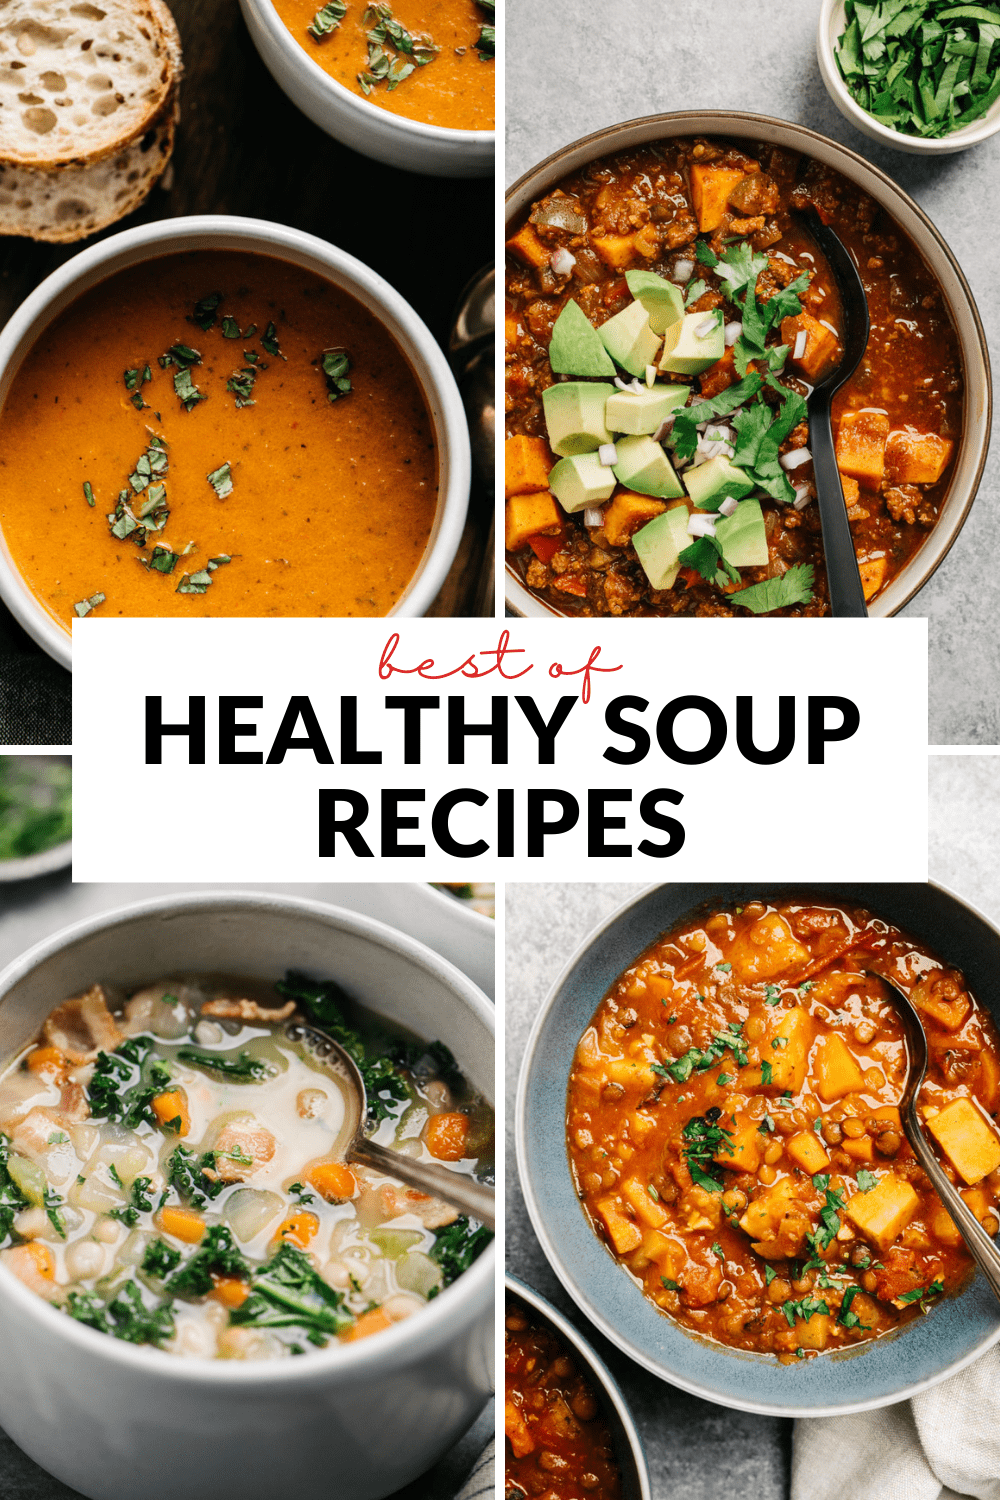 A collage of healthy soup recipe images with a title bar in the middle that reads "best of healthy soup recipes".